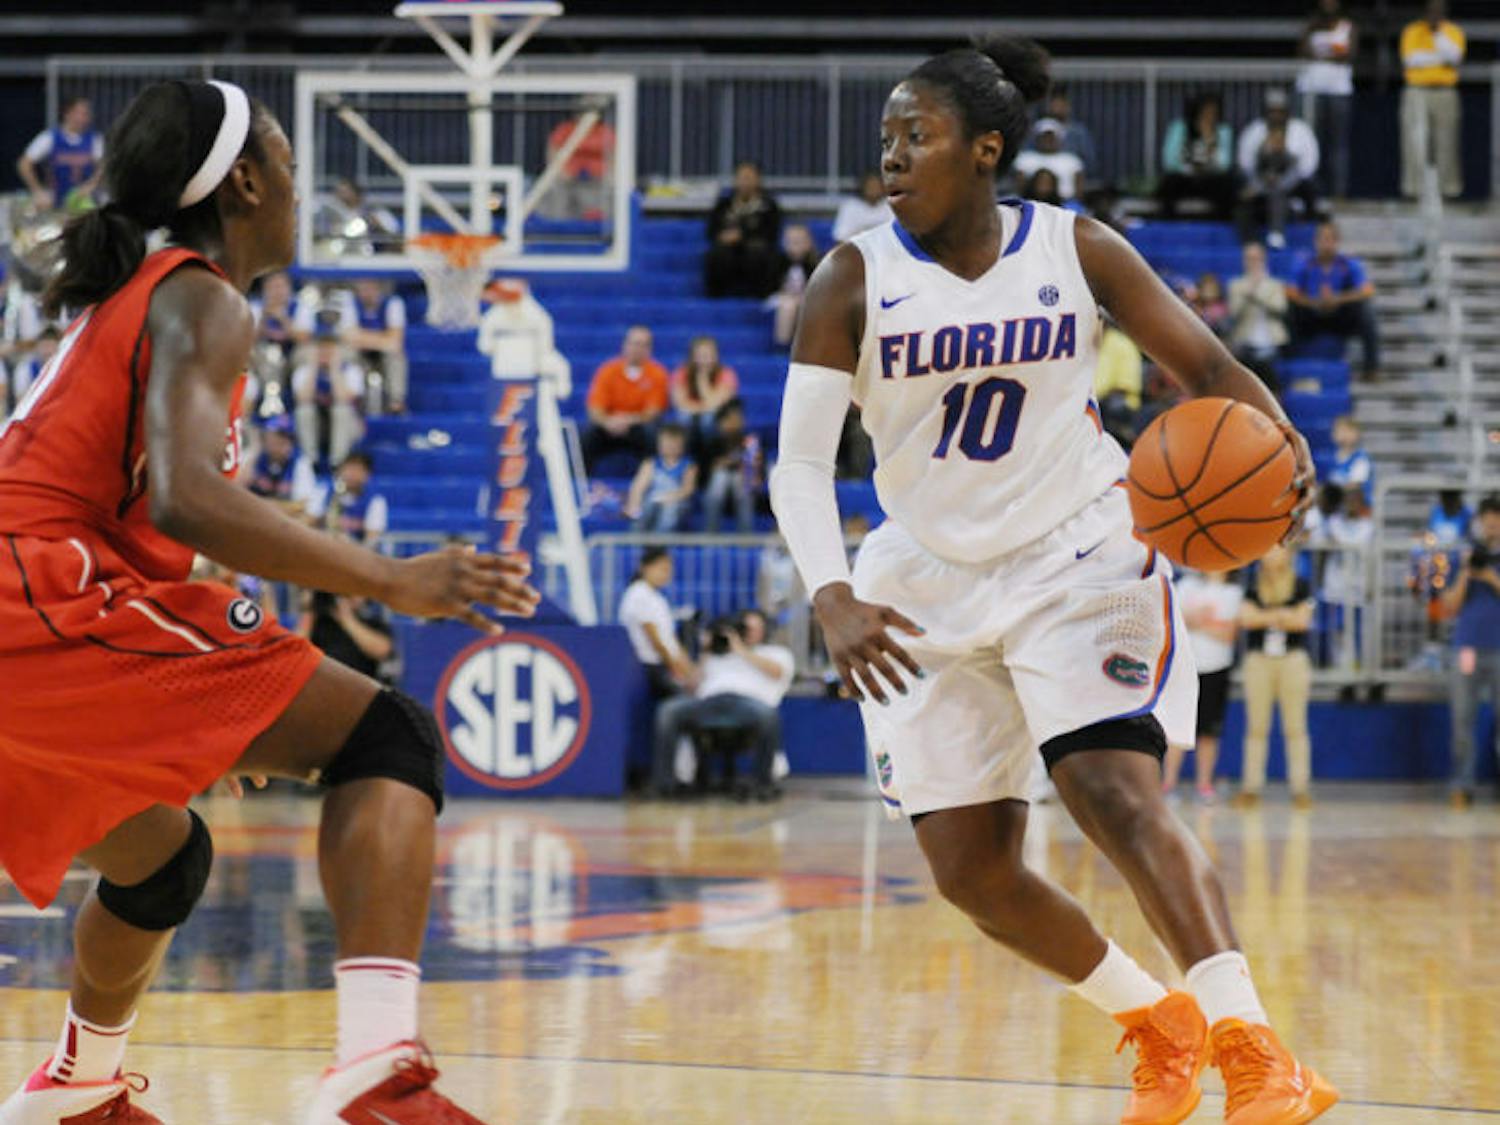 Jaterra Bonds looks for an opening during Florida’s 68-62 loss against Georgia on Jan. 19 in the O’Connell Center.&nbsp;